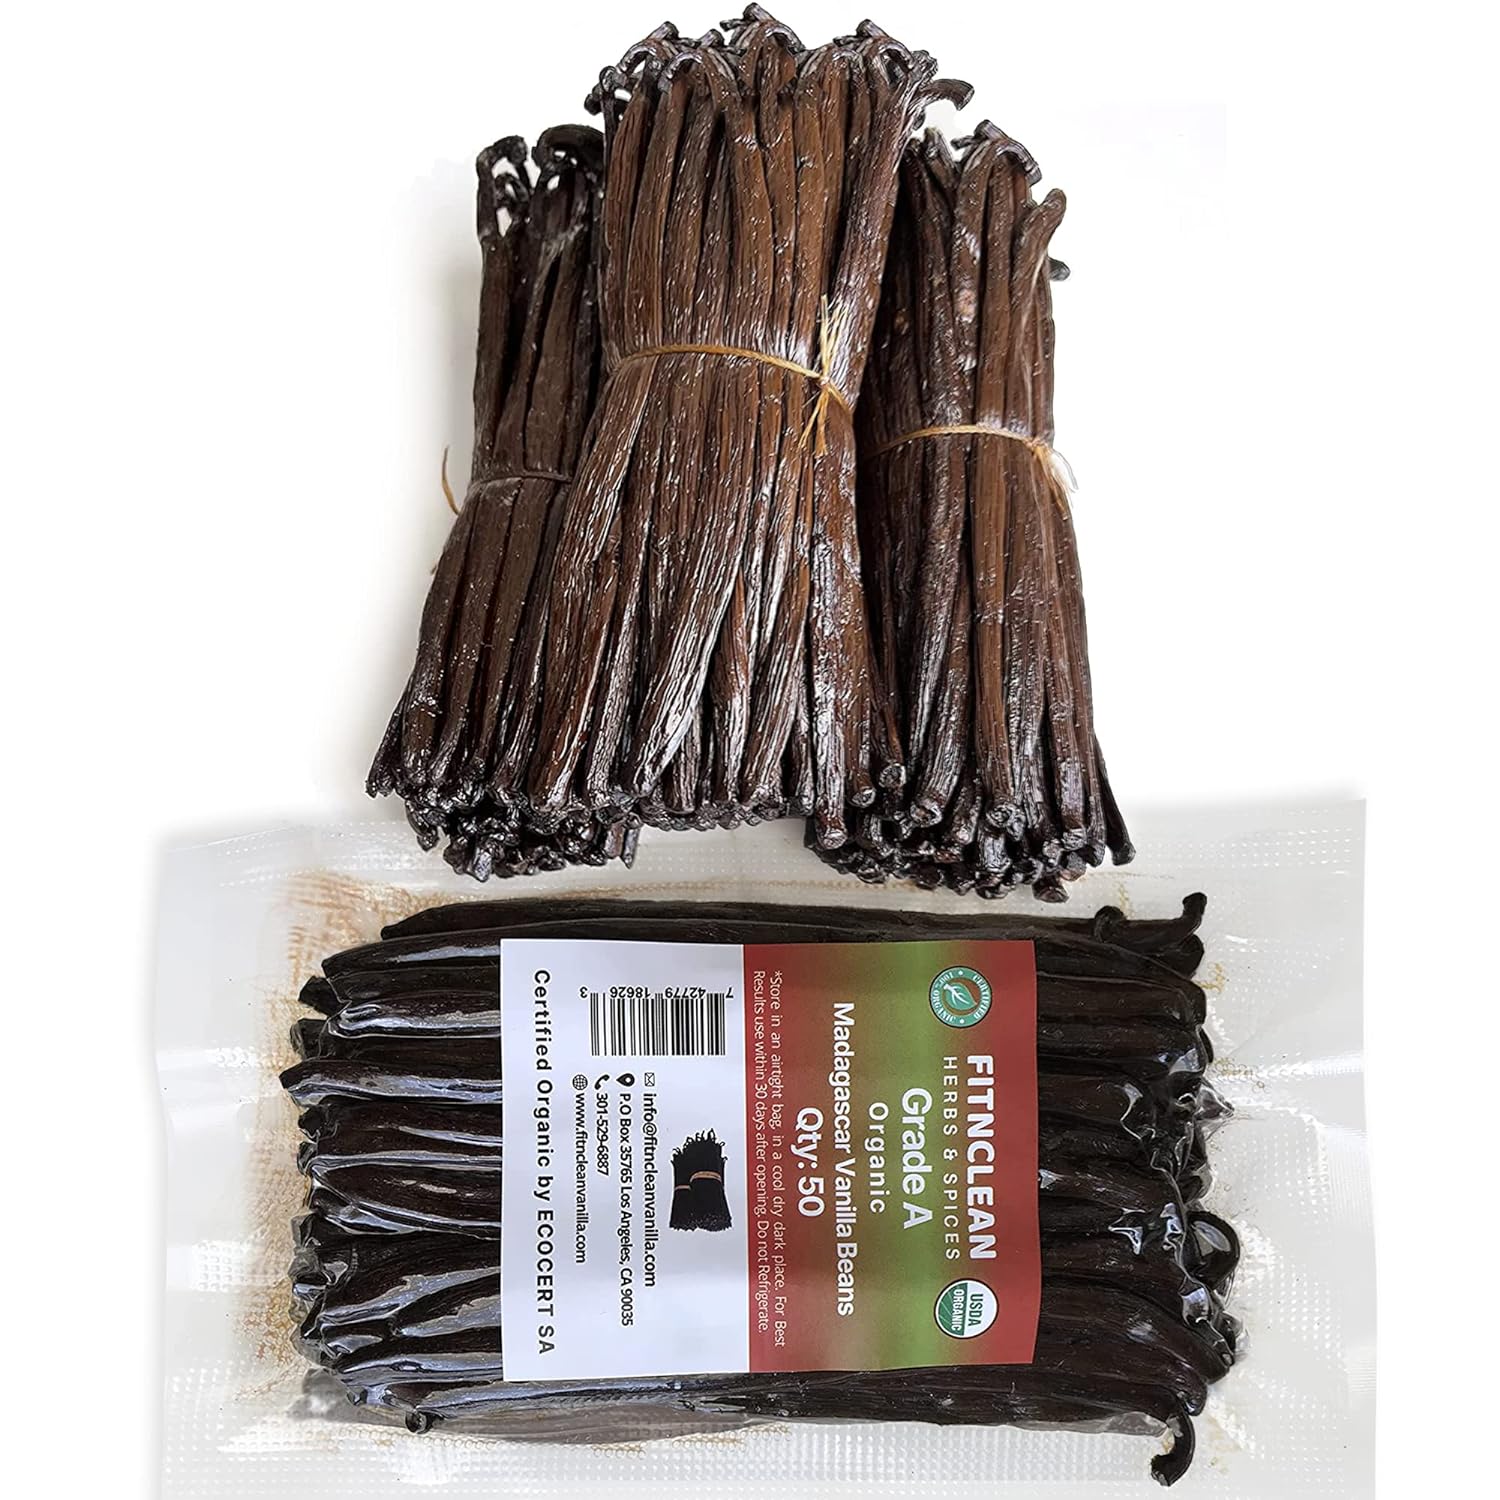 50 Organic Grade A Madagascar Vanilla Beans. Certified USDA Organic. ~5" by FITNCLEAN VANILLA. Bulk for Extract and all things Vanilla. Fresh Bourbon NON-GMO Pods